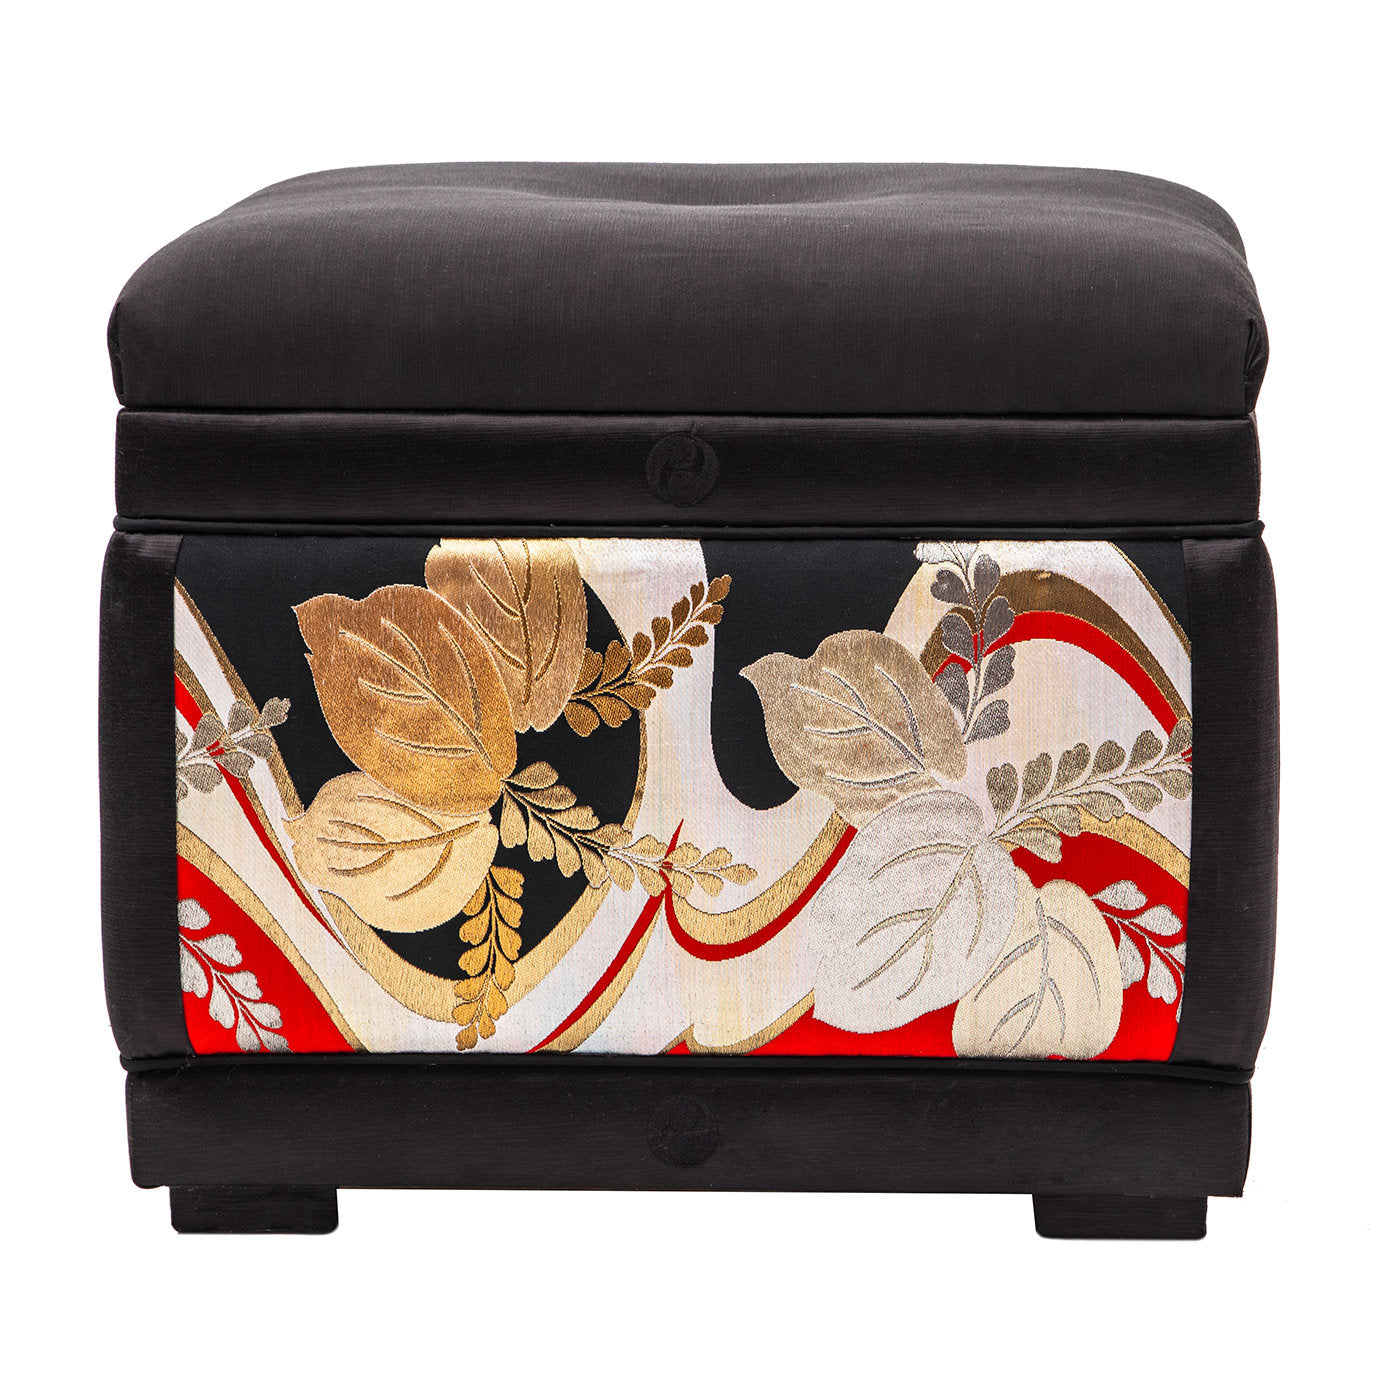 Ottoman Covered With Antique Japanese Obi Sashes  - Alternative view 2